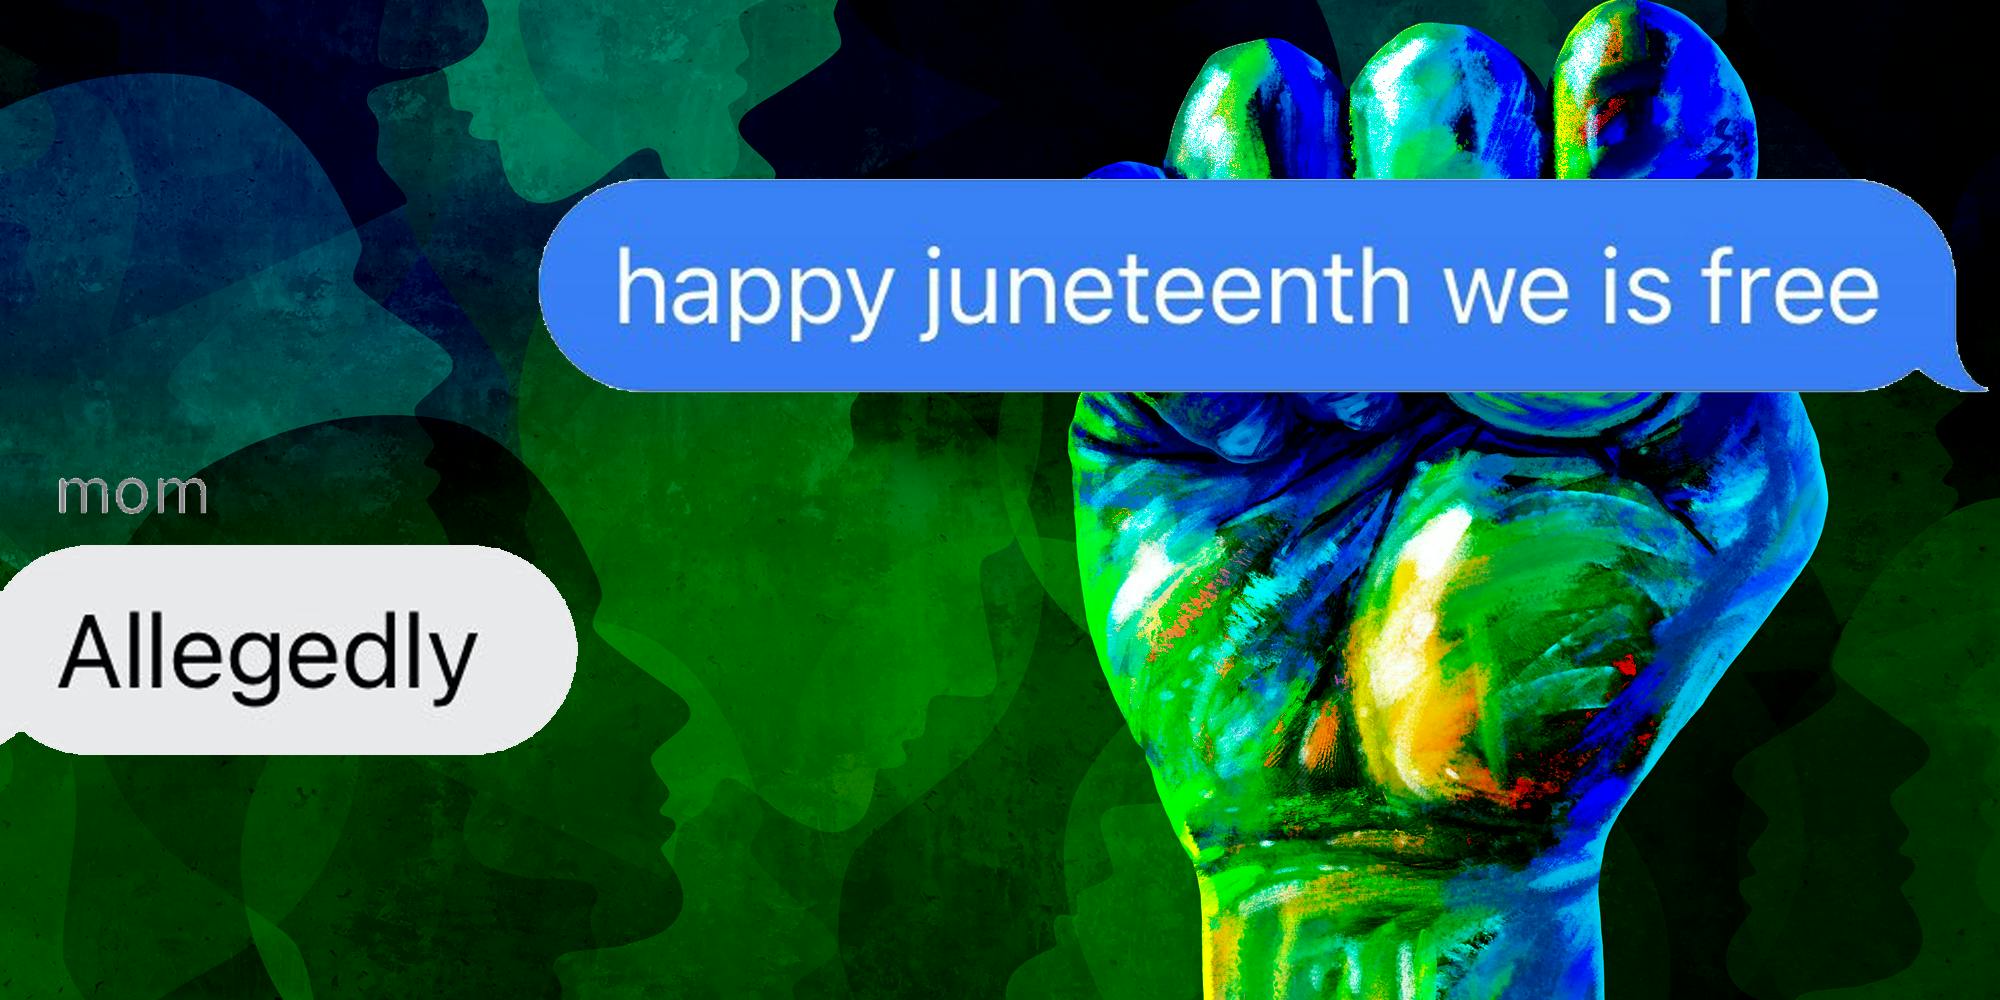 Fist being raised with text that says "happy juneteeth we is free. Mom: allegedly"